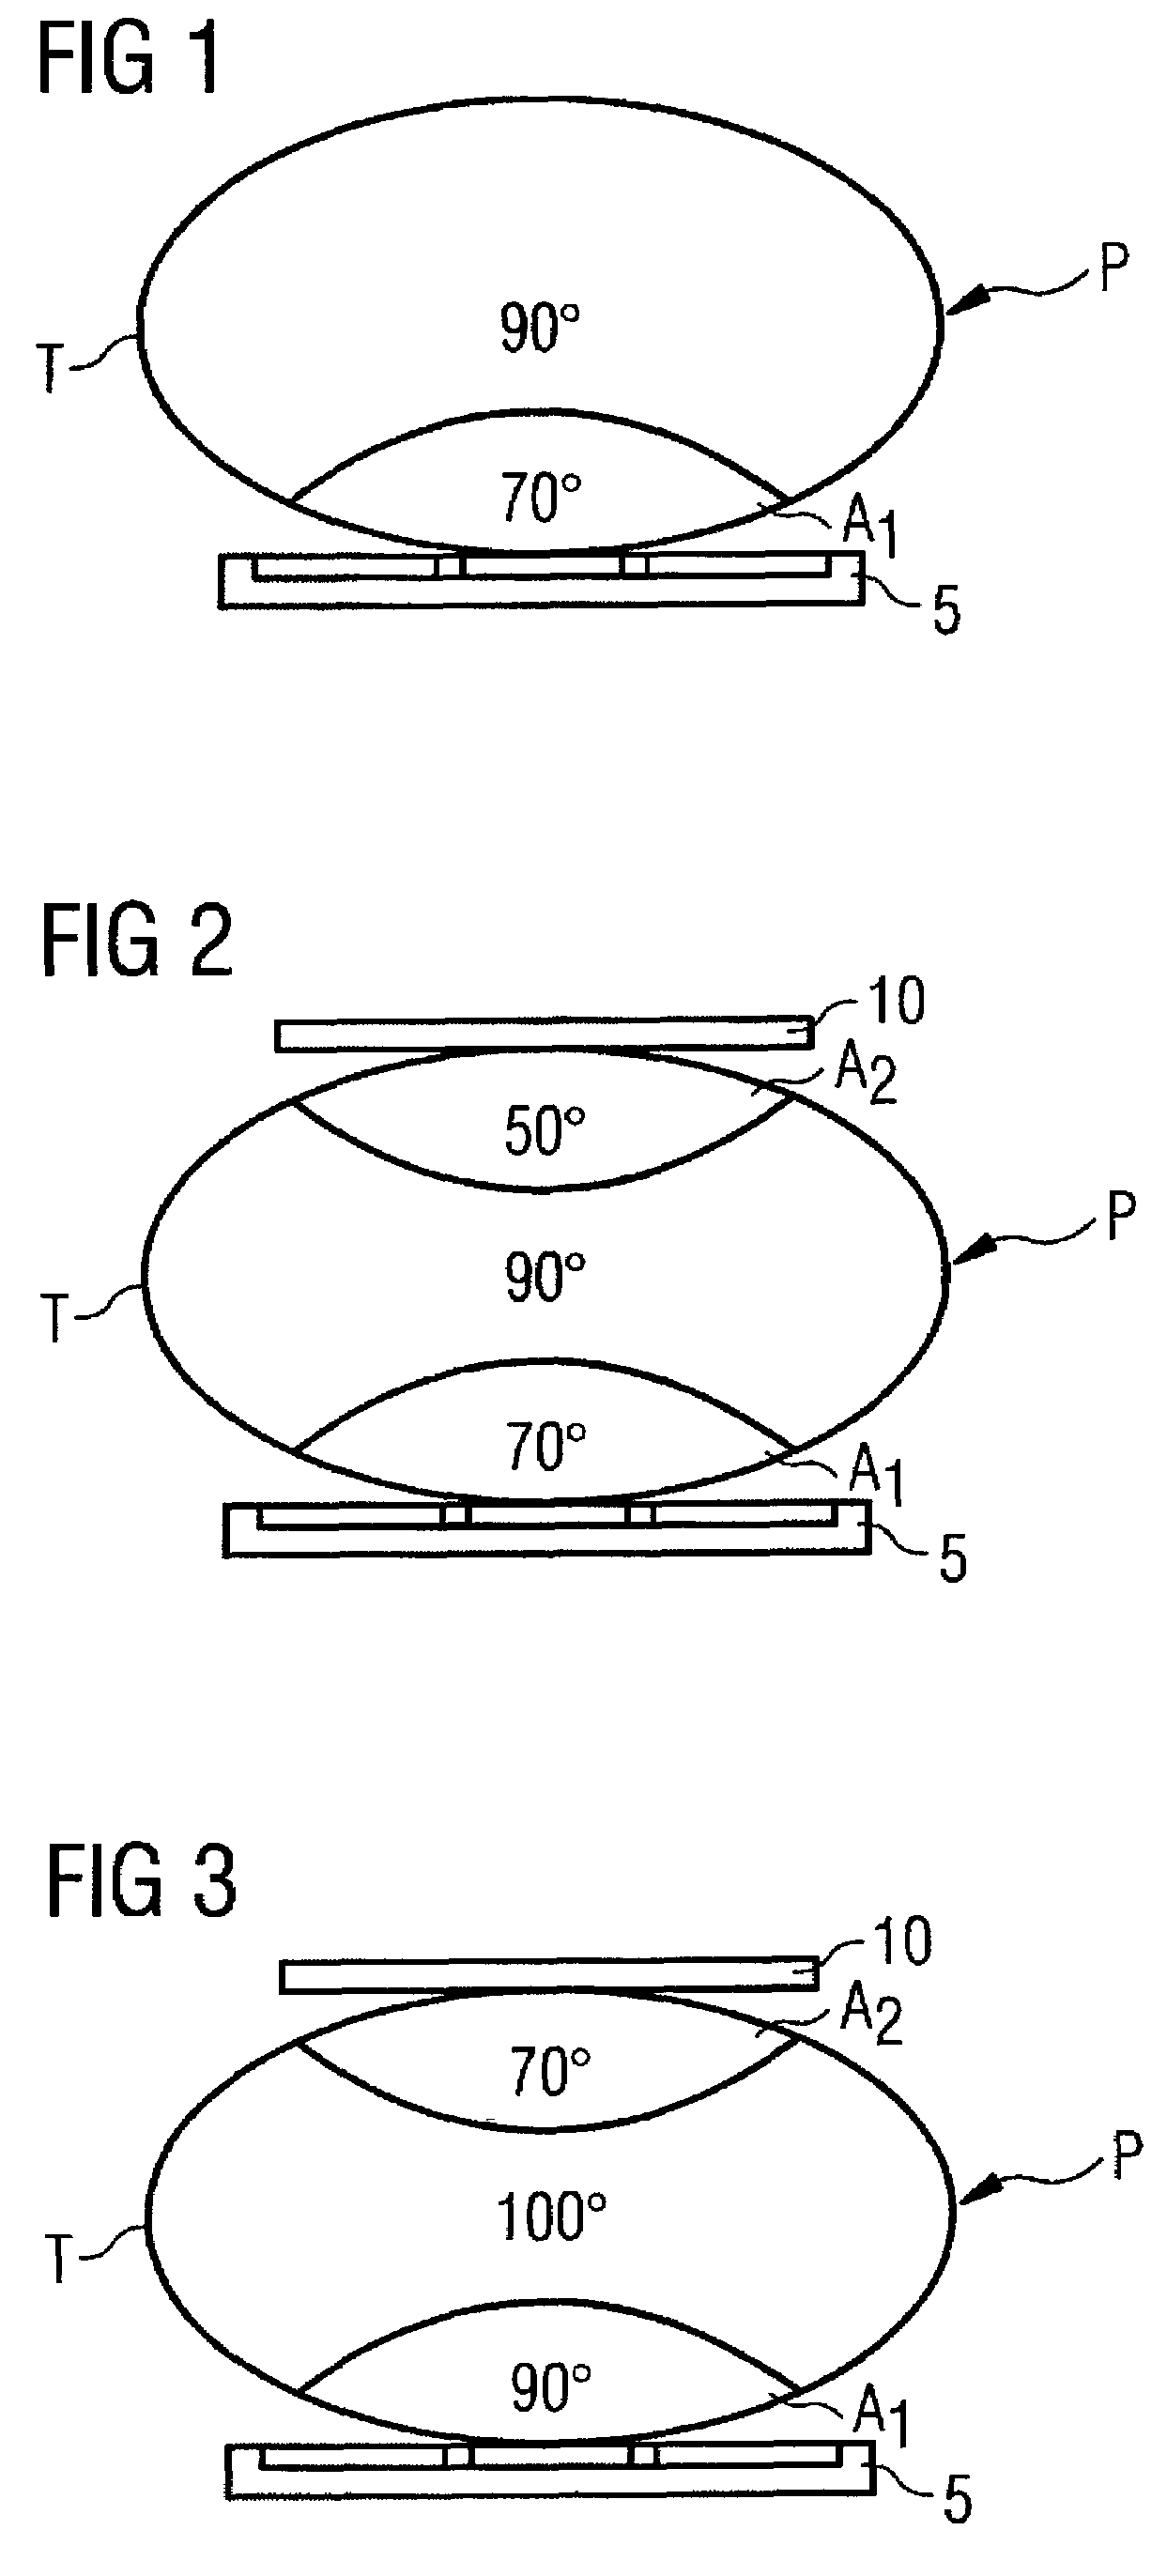 Magnetic resonance apparatus, method and auxilliary coil element for manipulation of the B1 field